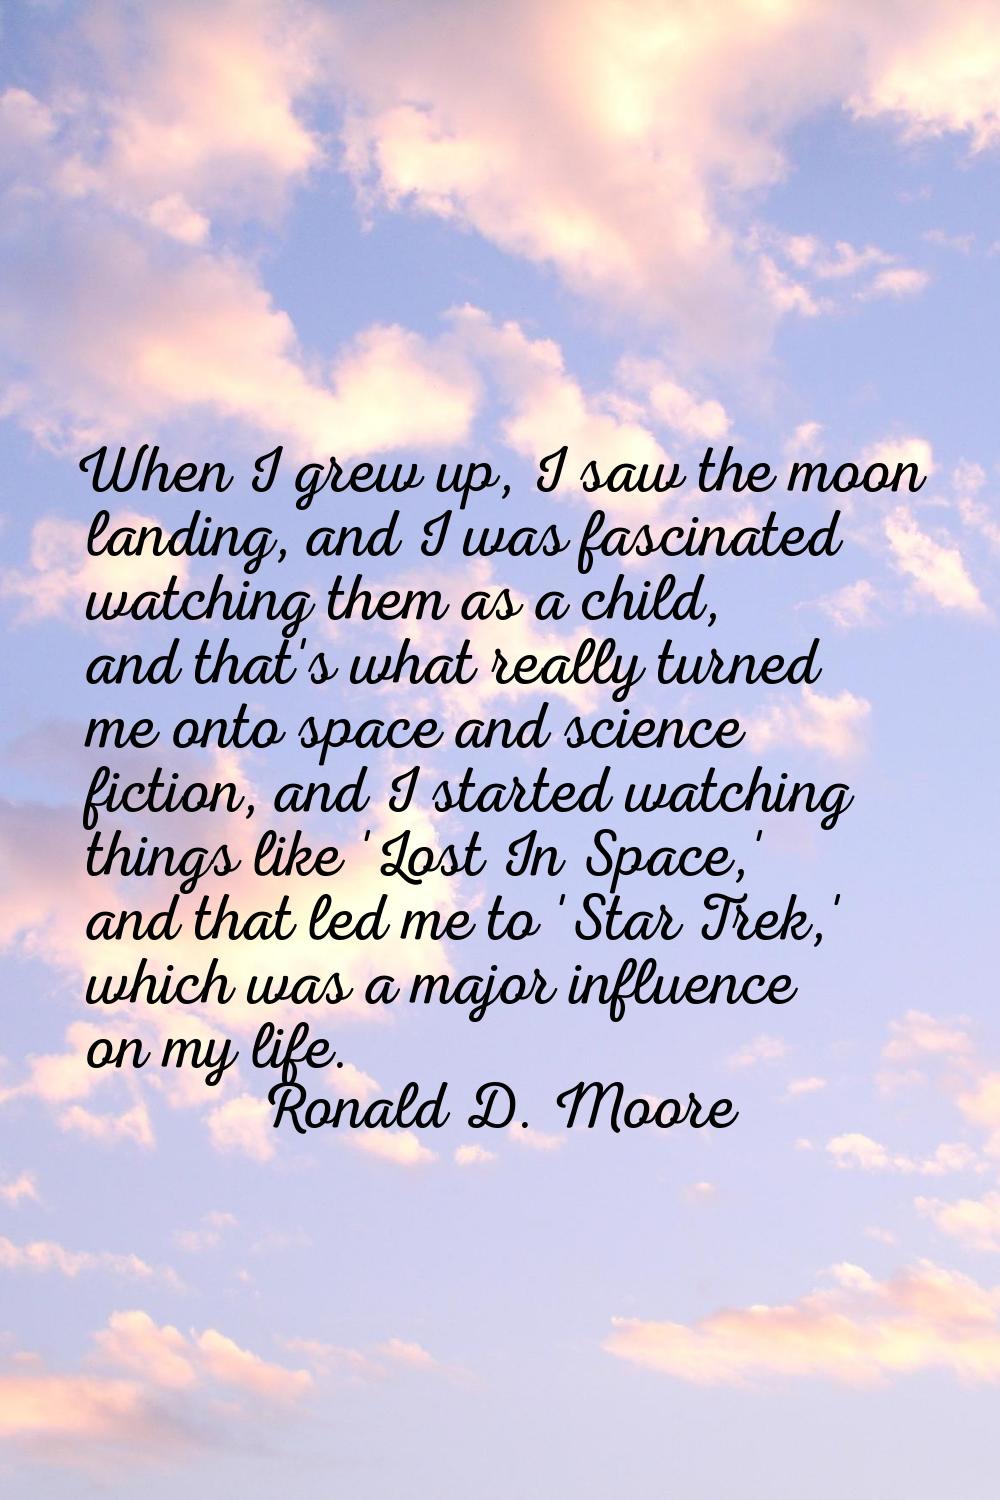 When I grew up, I saw the moon landing, and I was fascinated watching them as a child, and that's w